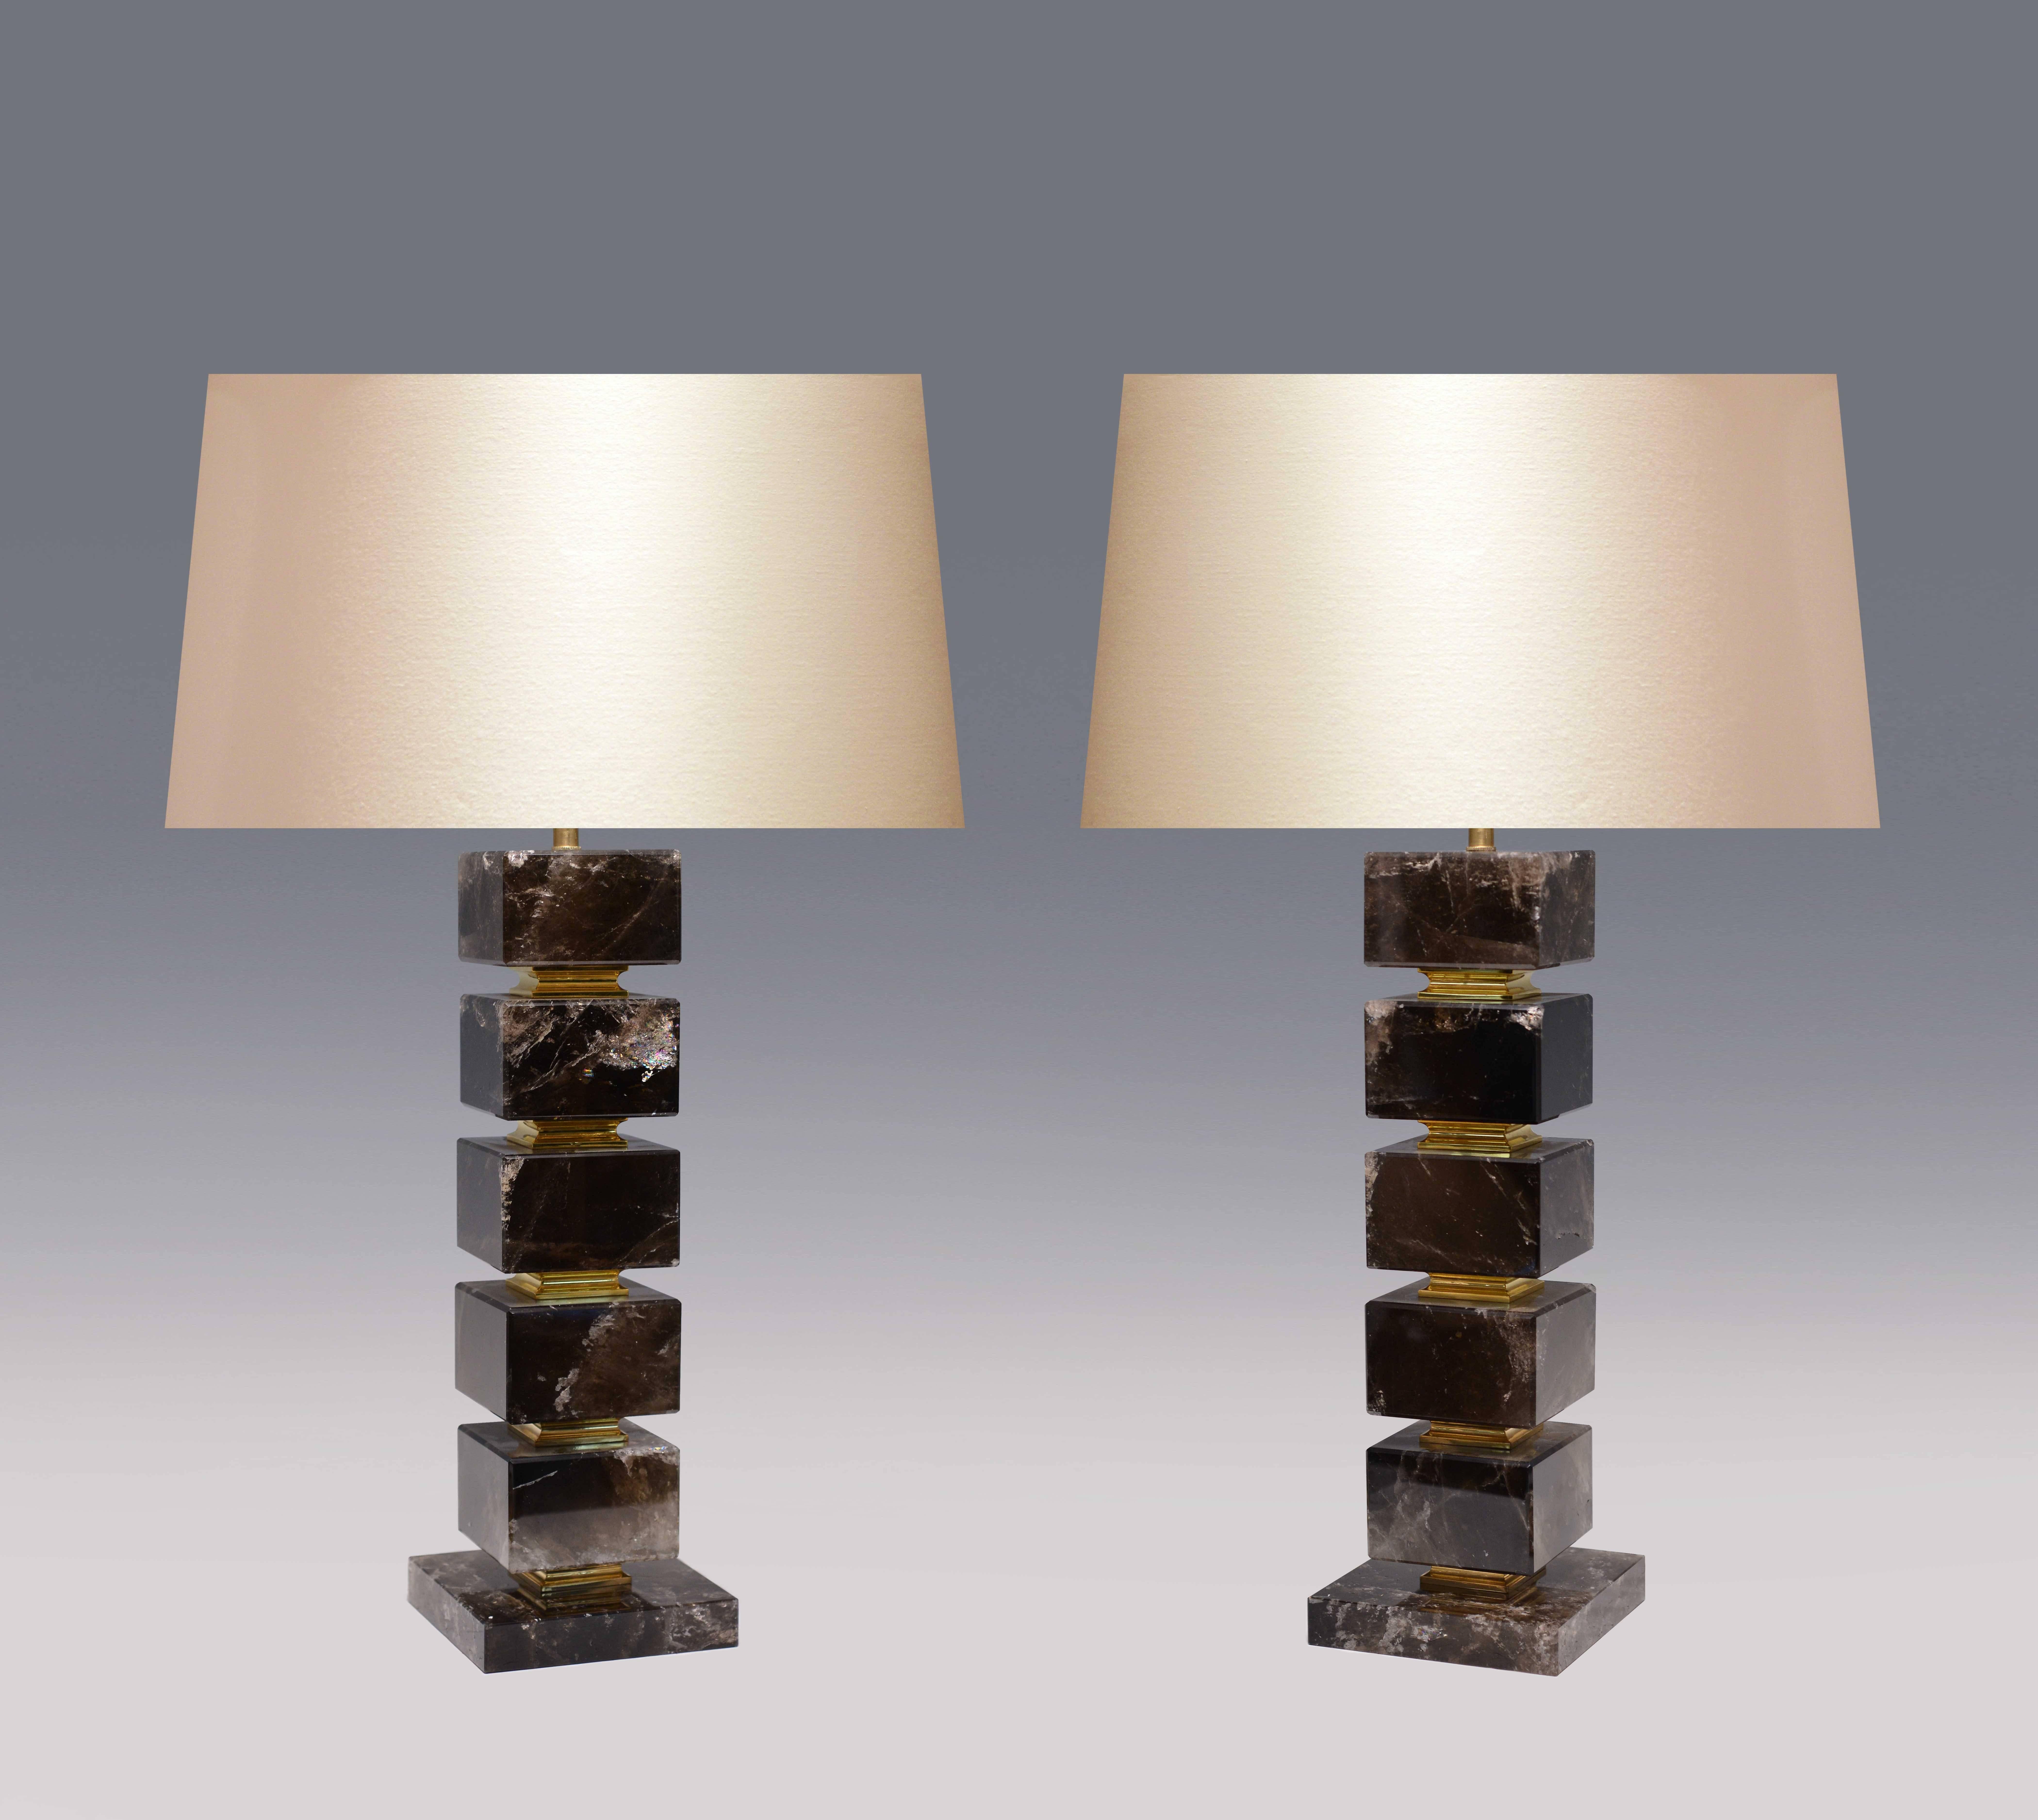 A cubic form smoky brown rock crystal quartz lamp with brass decoration, created by Phoenix Gallery, NYC.
Available in nickel plating and antique brass finished. 
Measures: To the rock crystal: 19